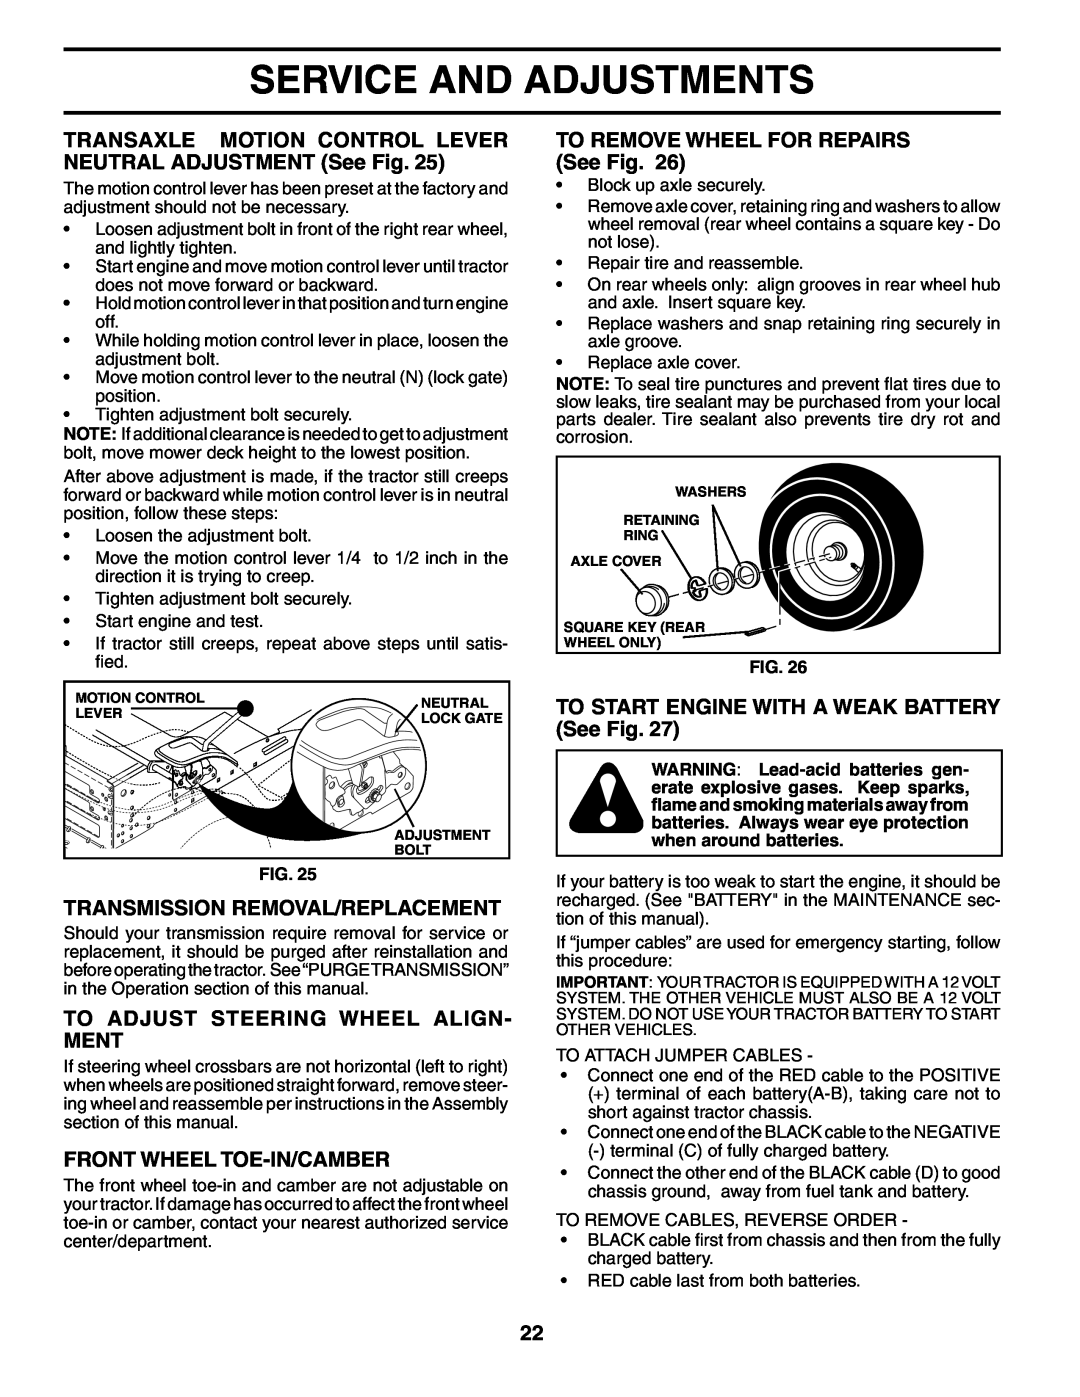 Poulan 195021 manual TRANSAXLE MOTION CONTROL LEVER NEUTRAL ADJUSTMENT See Fig, Transmission Removal/Replacement 